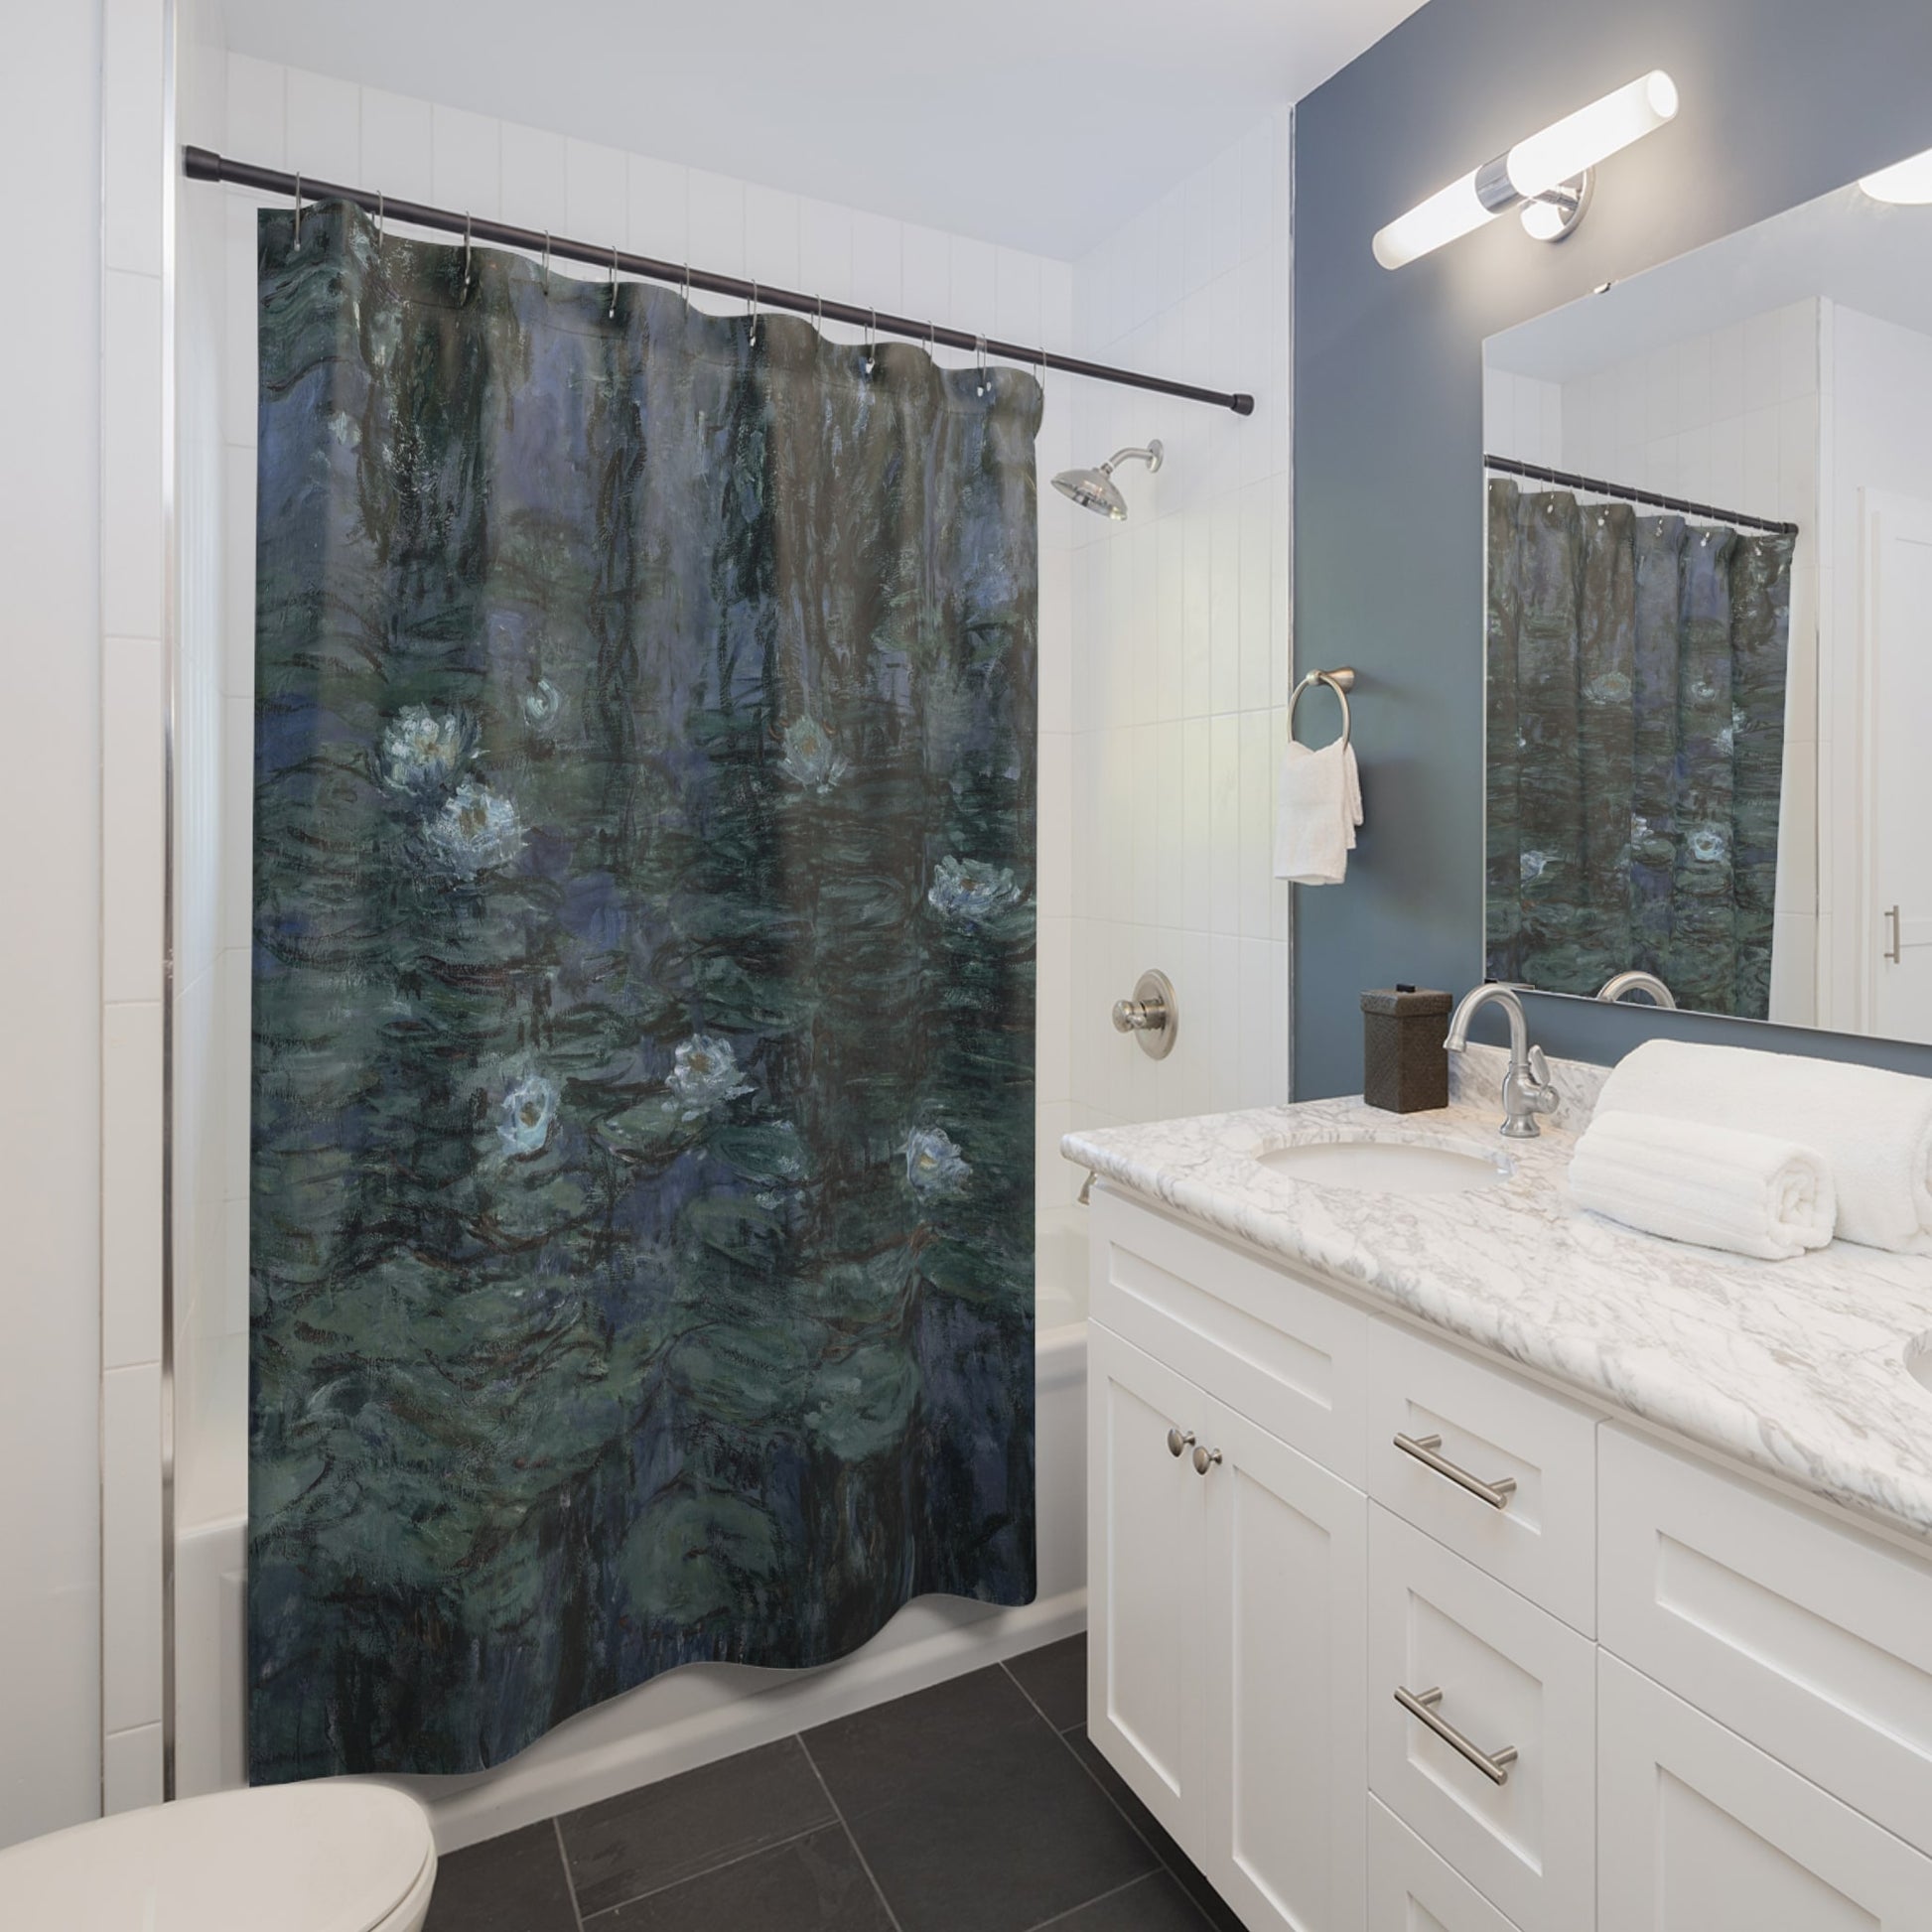 Deep Blue and Green Shower Curtain Best Bathroom Decorating Ideas for Landscapes Decor